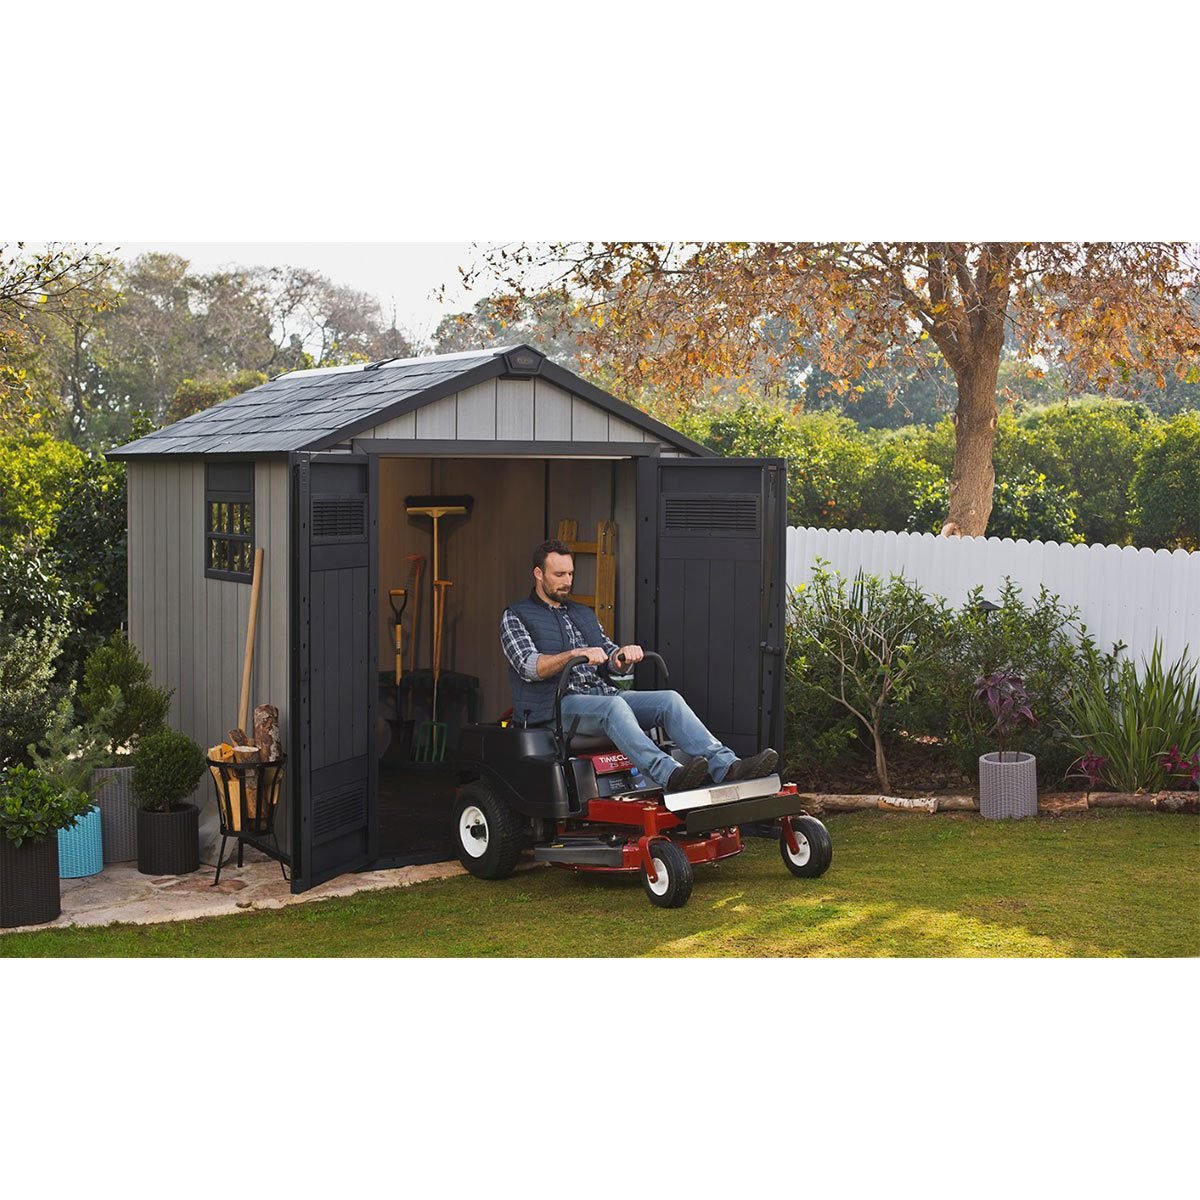 Keter Oakland 7ft 6" x 11ft (2.3 x 3.4m) Shed - Signature Retail Stores